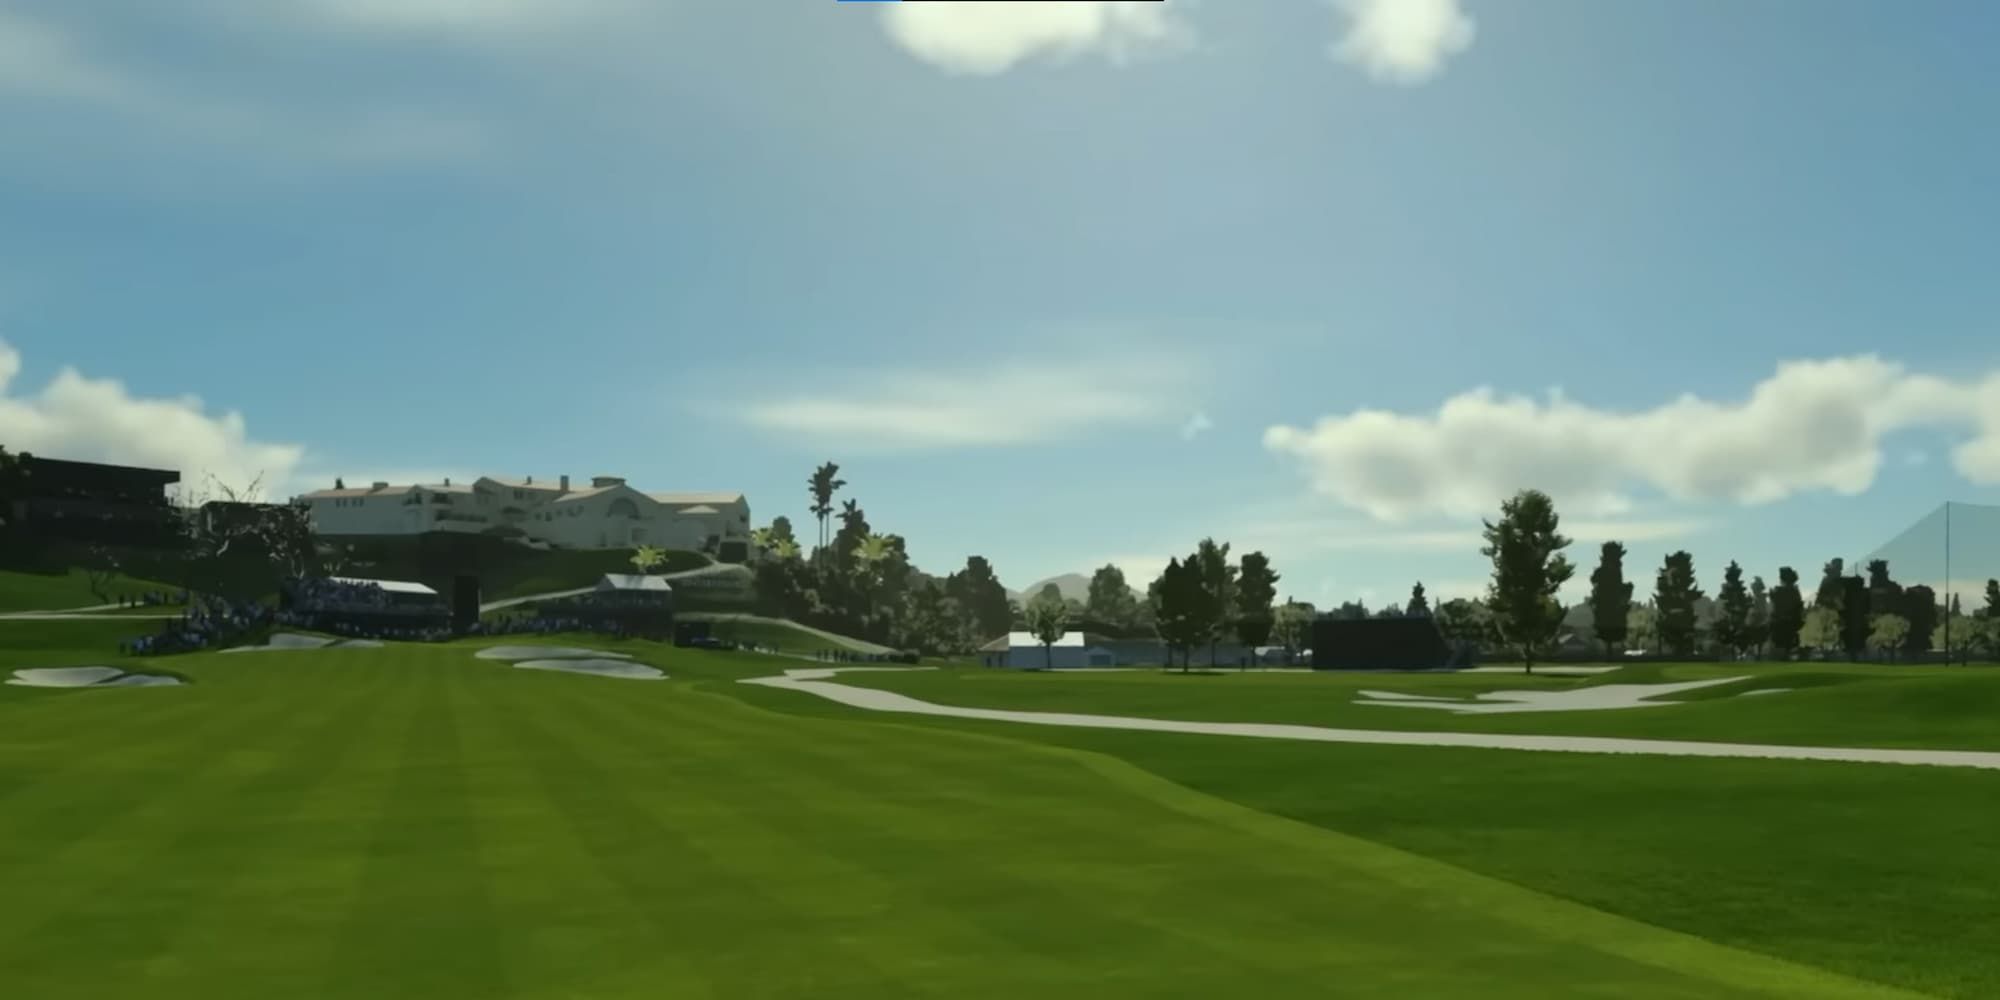 The Riviera Country Club course sits near LA surrounded by open air and mansions.